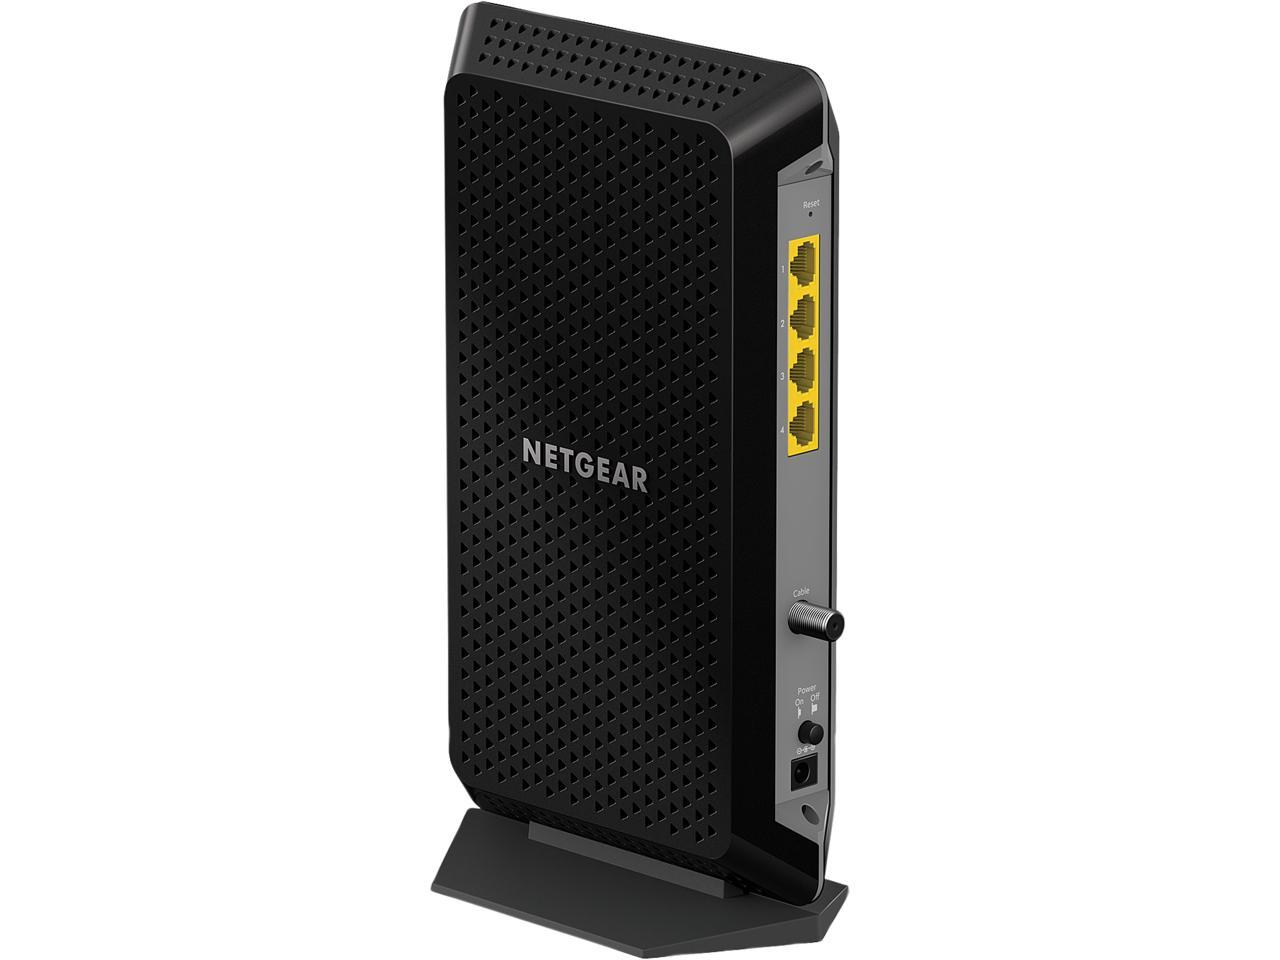 Notorious debate evolution NETGEAR DOCSIS 3.1 Multi-Gig Cable Modem with 4 Ethernet Ports. Max  download speeds of 6.0 Gbps, For XFINITY by Comcast, Spectrum, and Cox  (CM1200) - Newegg.com